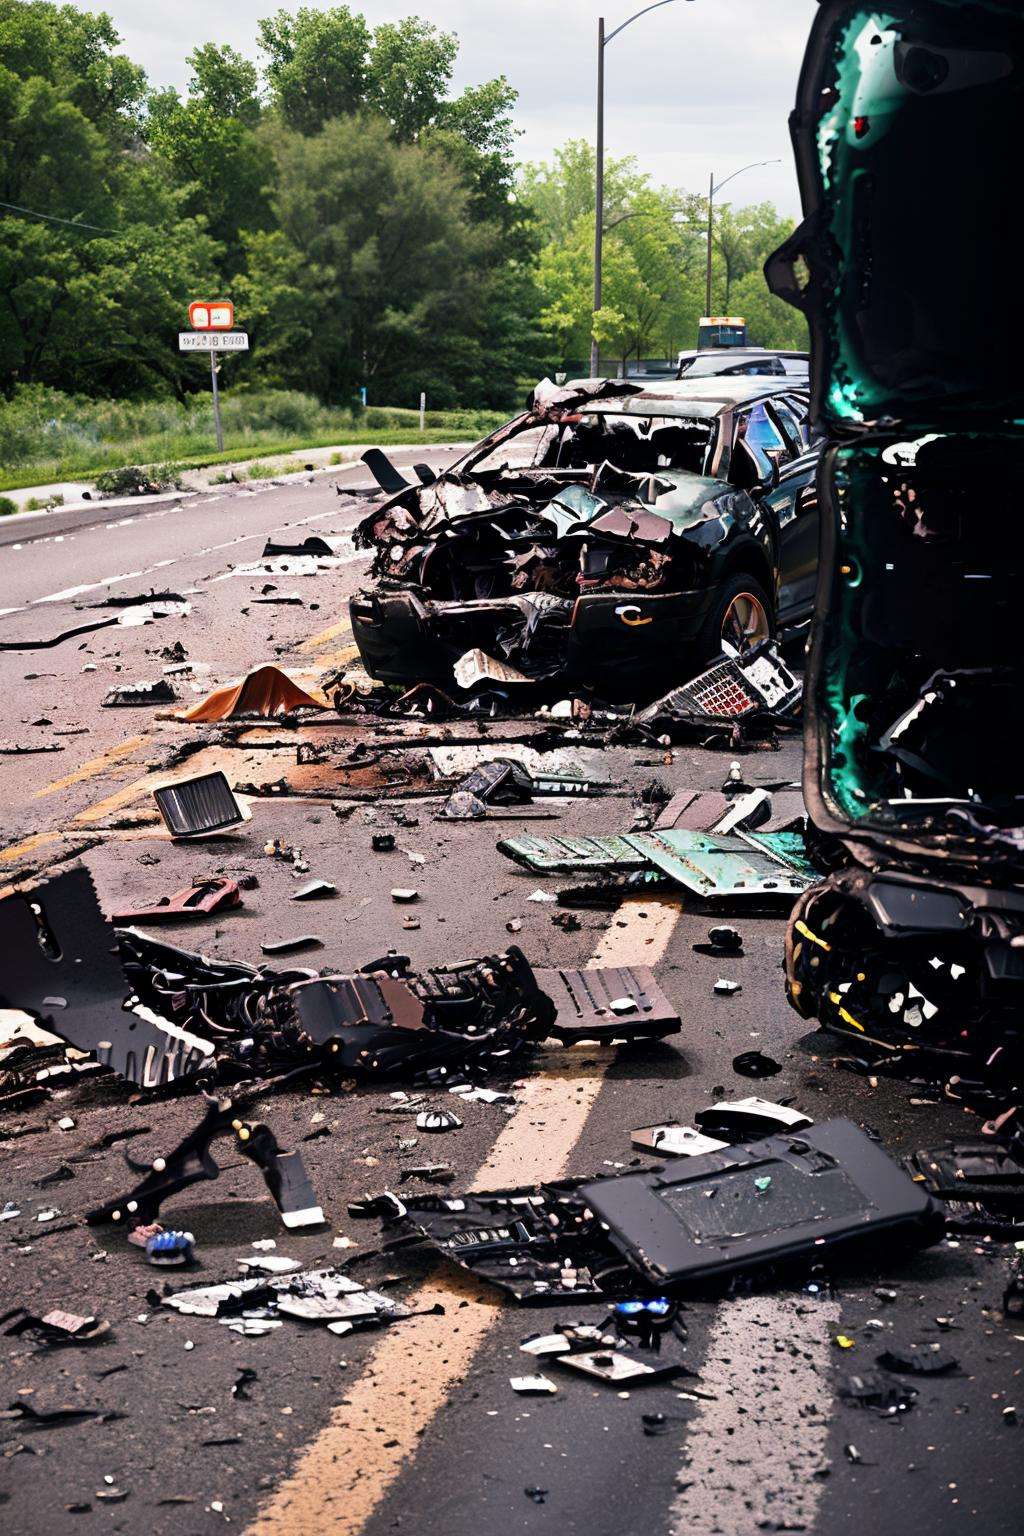 The collision site is marked by broken glass and dented metal, capturing the aftermath of the crash and the resulting wreckage:1.5, collision site:1.2, marked by:1.2, broken glass:1.1, dented metal:1.1, capturing:1.0, aftermath of the crash:1.1, resulting wreckage:1.1. , RoadWreck_Simulator